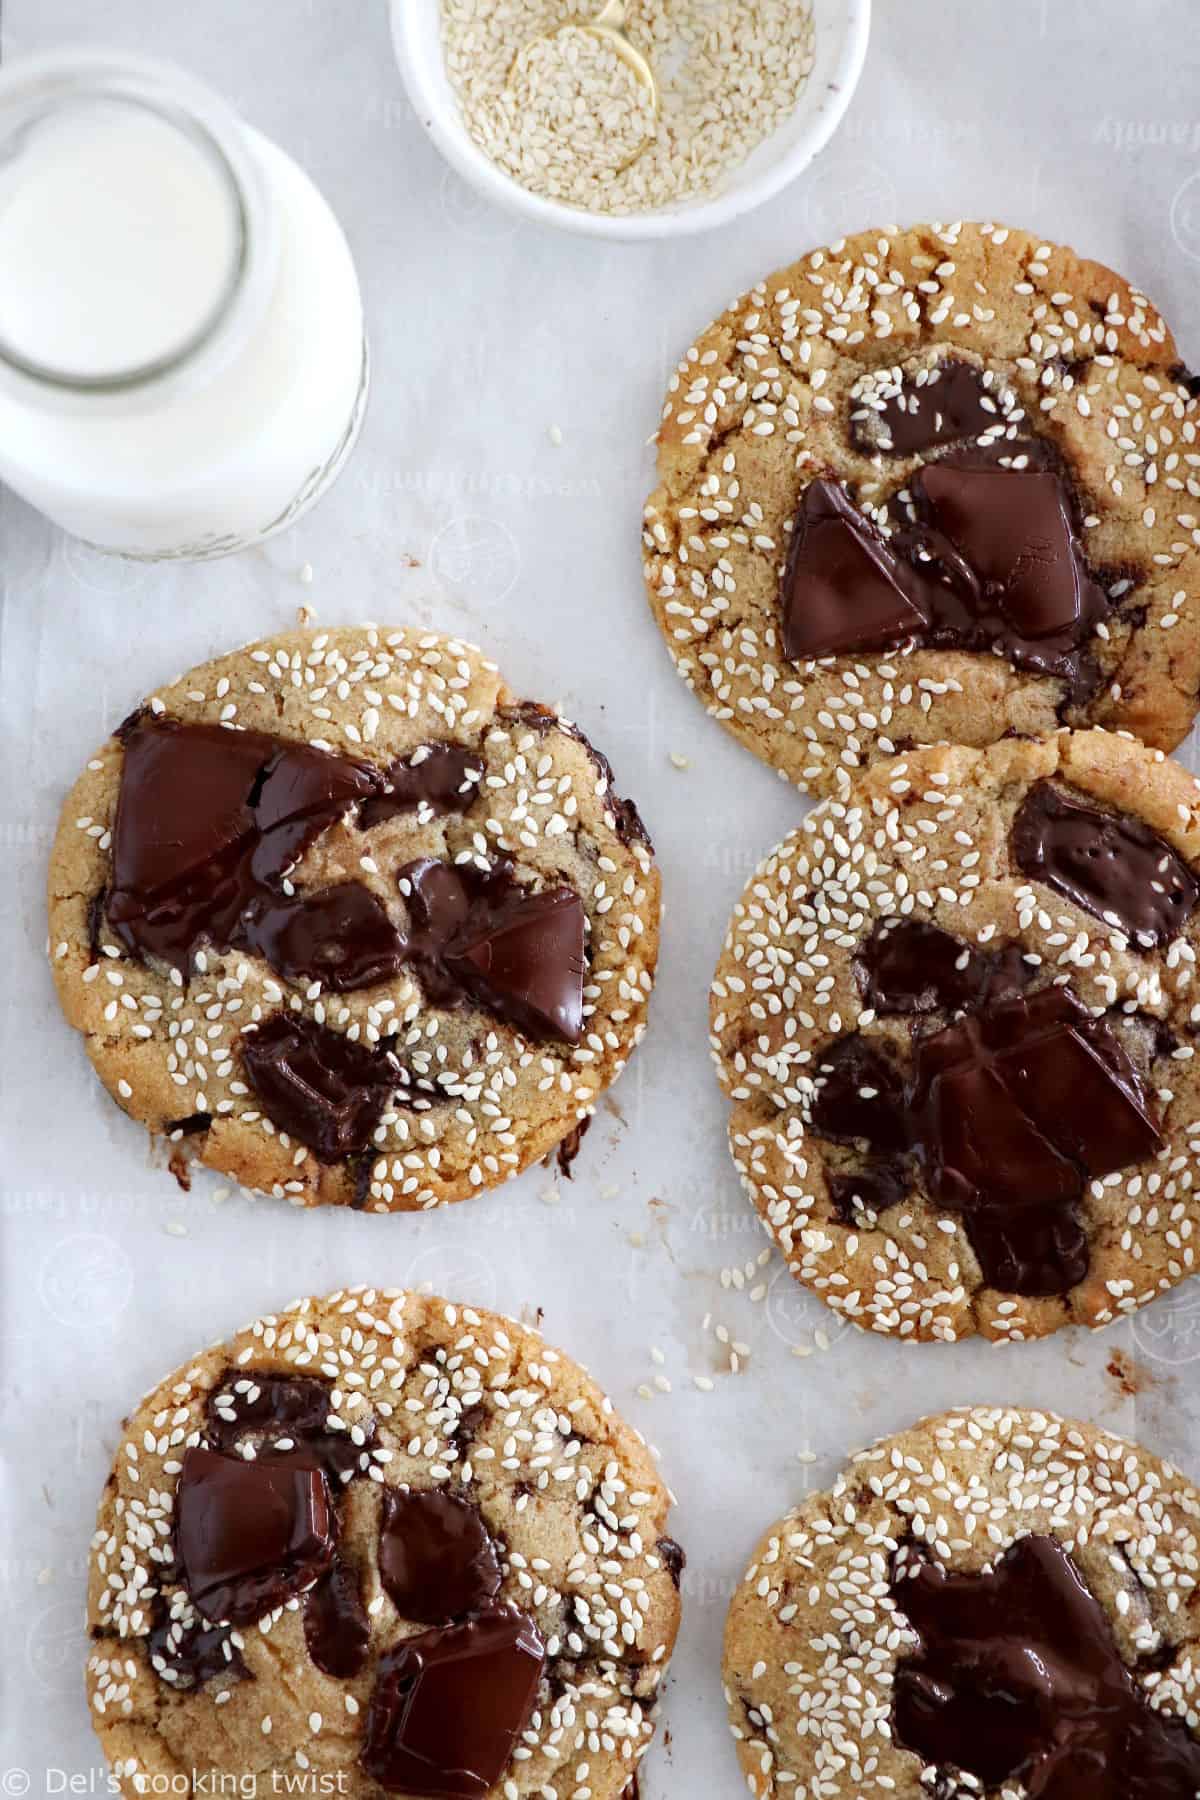 These brown butter miso chocolate chip cookies are loaded with umami flavors. Both sweet and savory, they are oozing with dark chocolate.